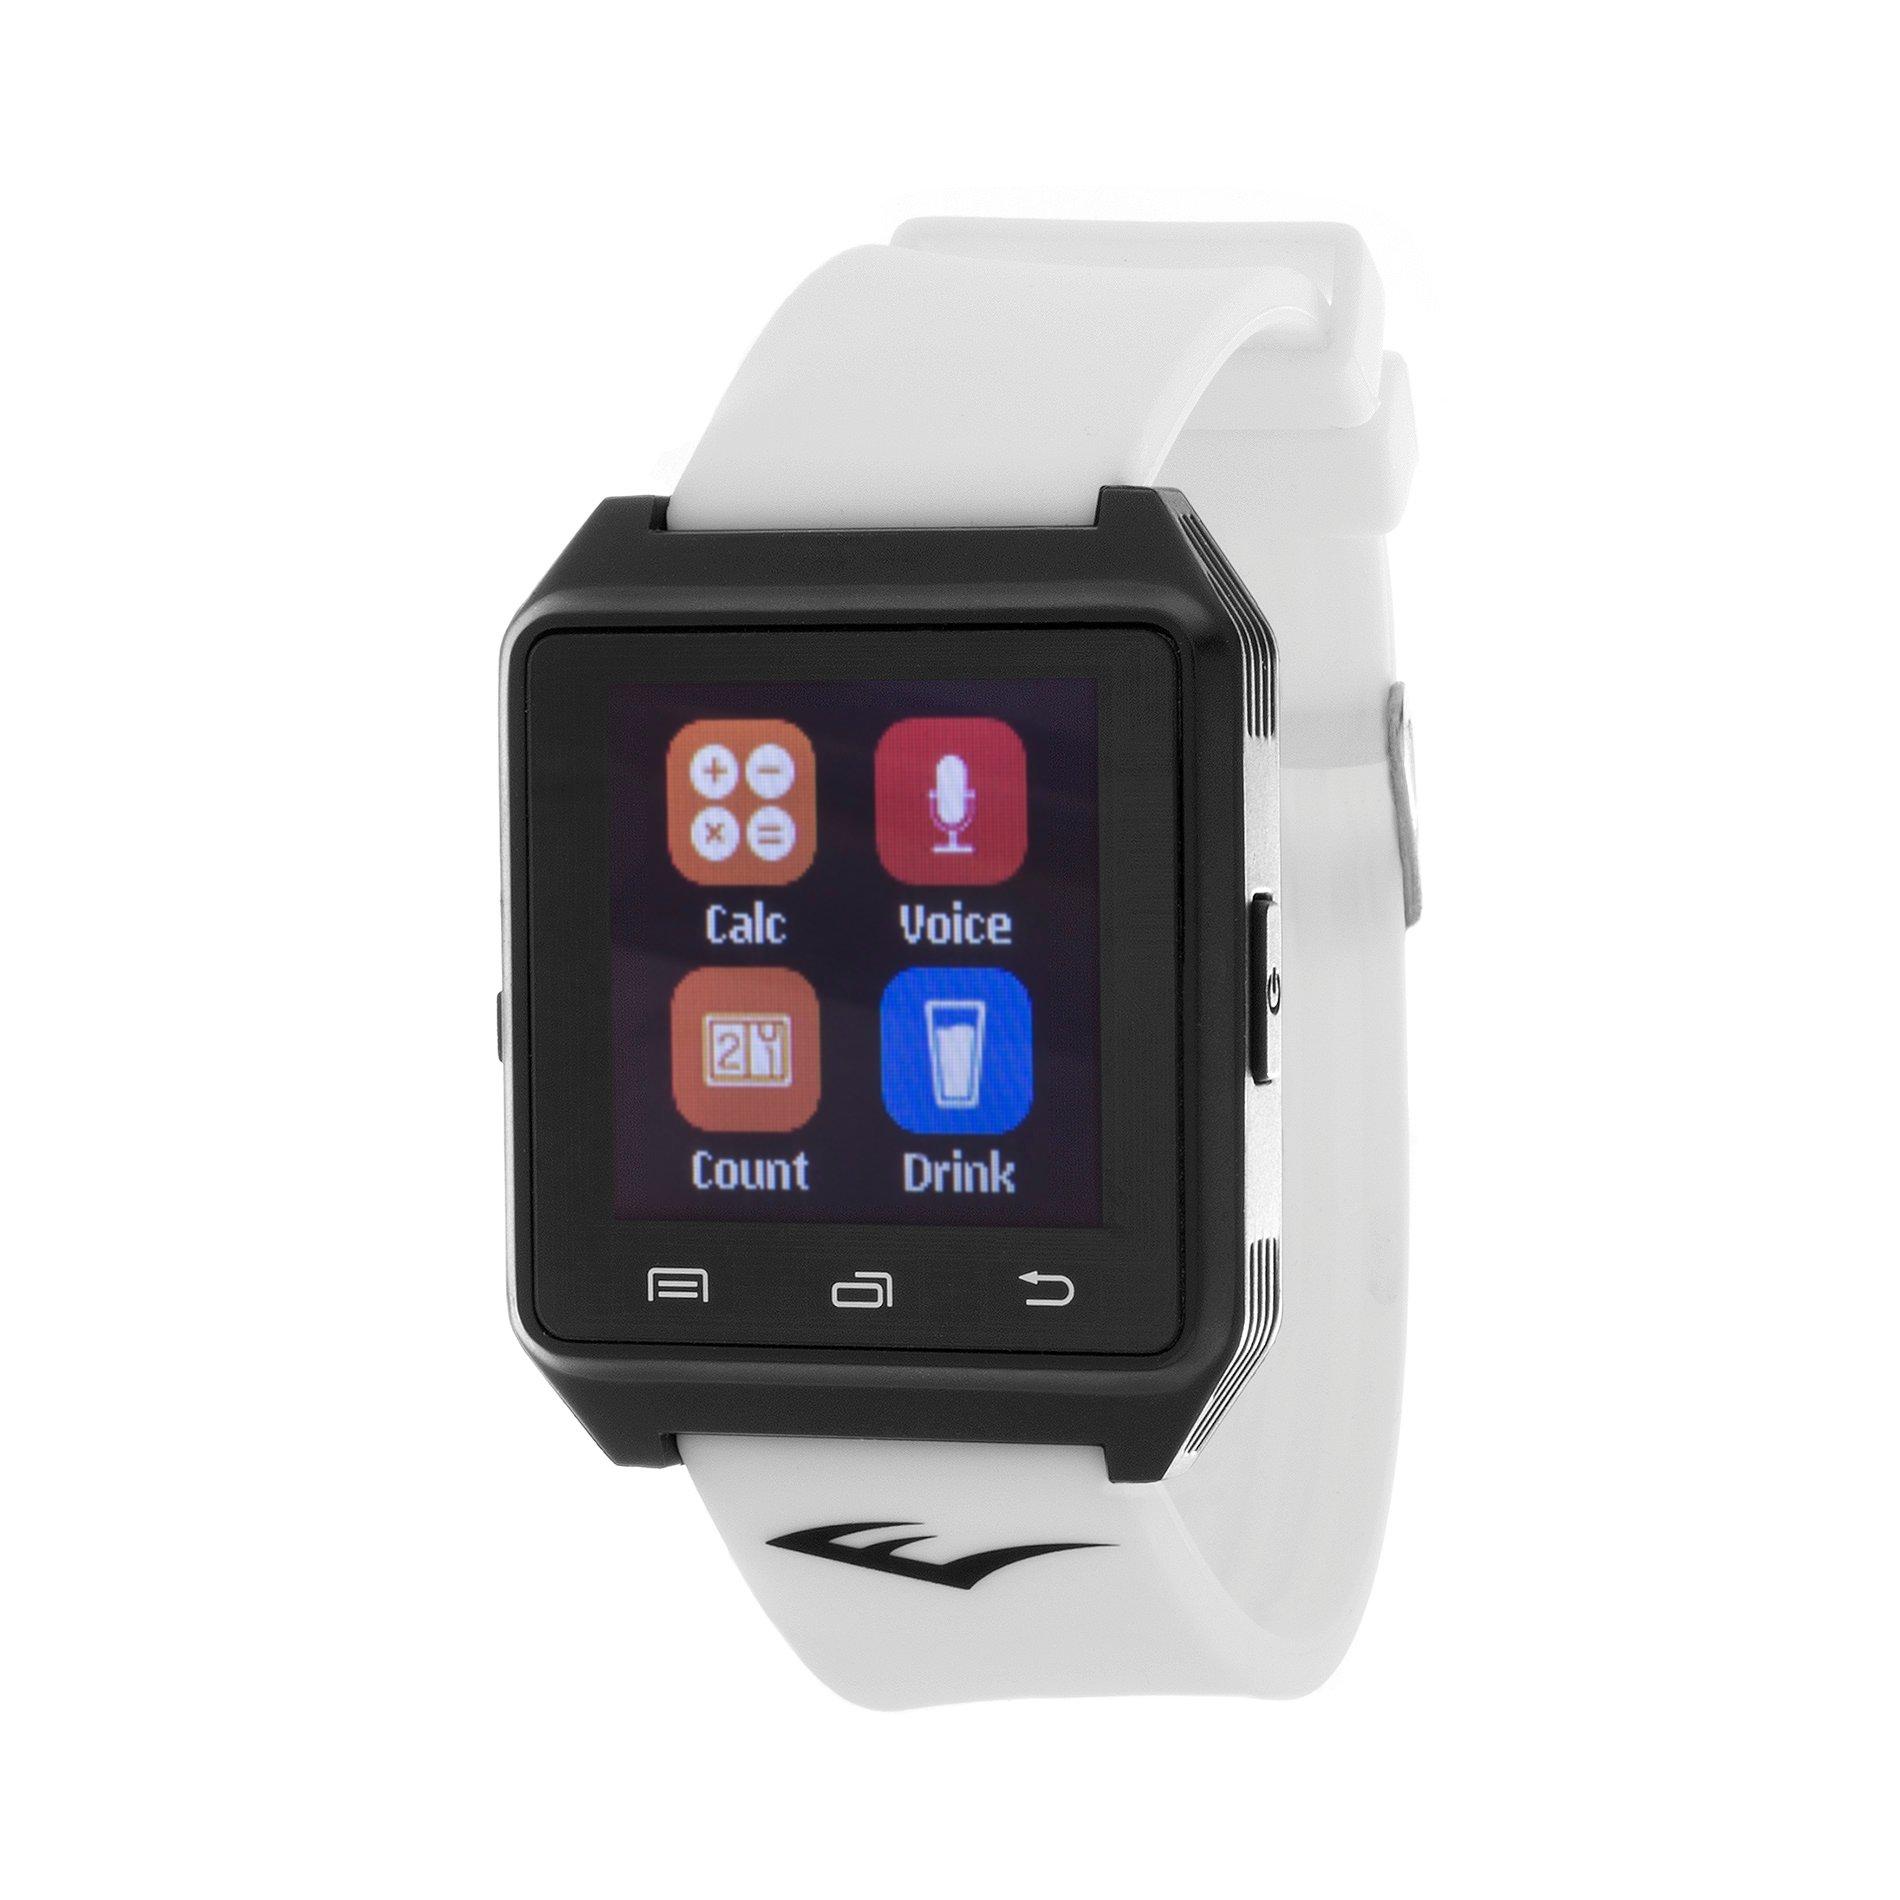 Everlast Activity Tracker Compatible with iOS and Android Devices Smartwatch, White (GameStop)